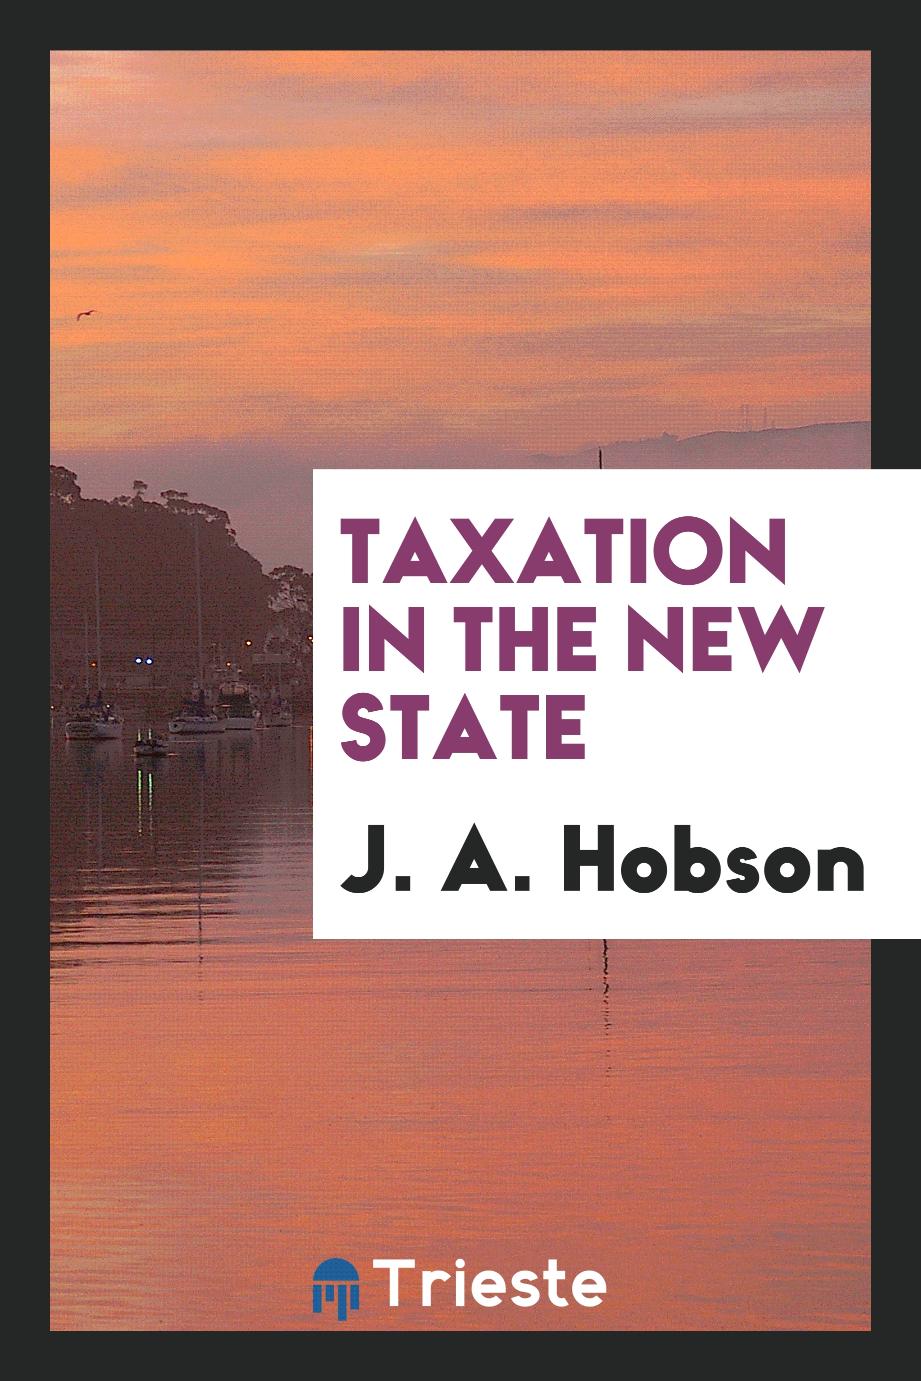 Taxation in the new state